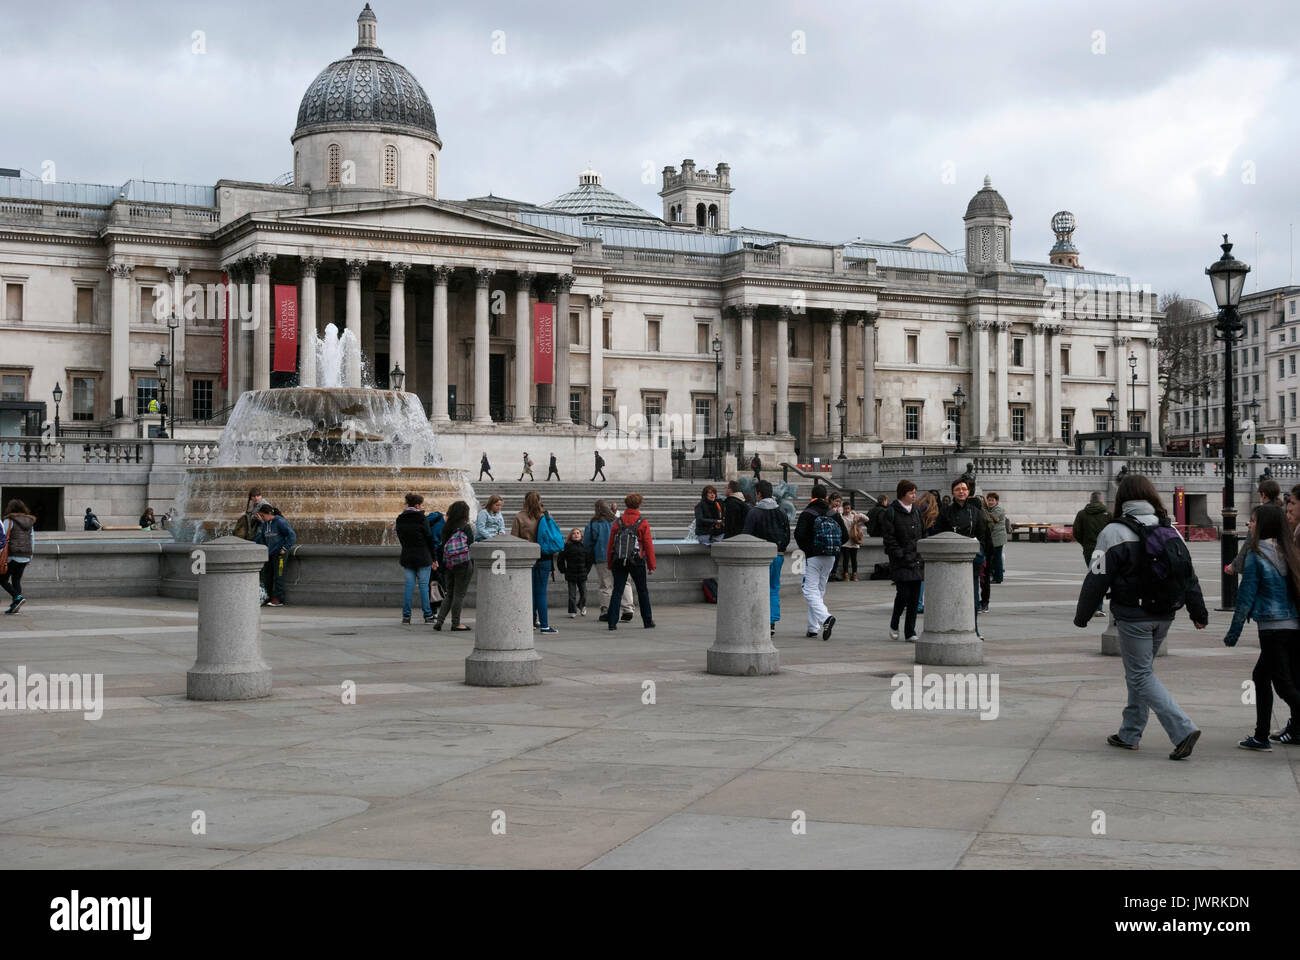 London England, The National Gallery, Art Museum, Trafalgar Square, The City of Westminster, Tourist Attraction, Historical 18th Century Building Stock Photo